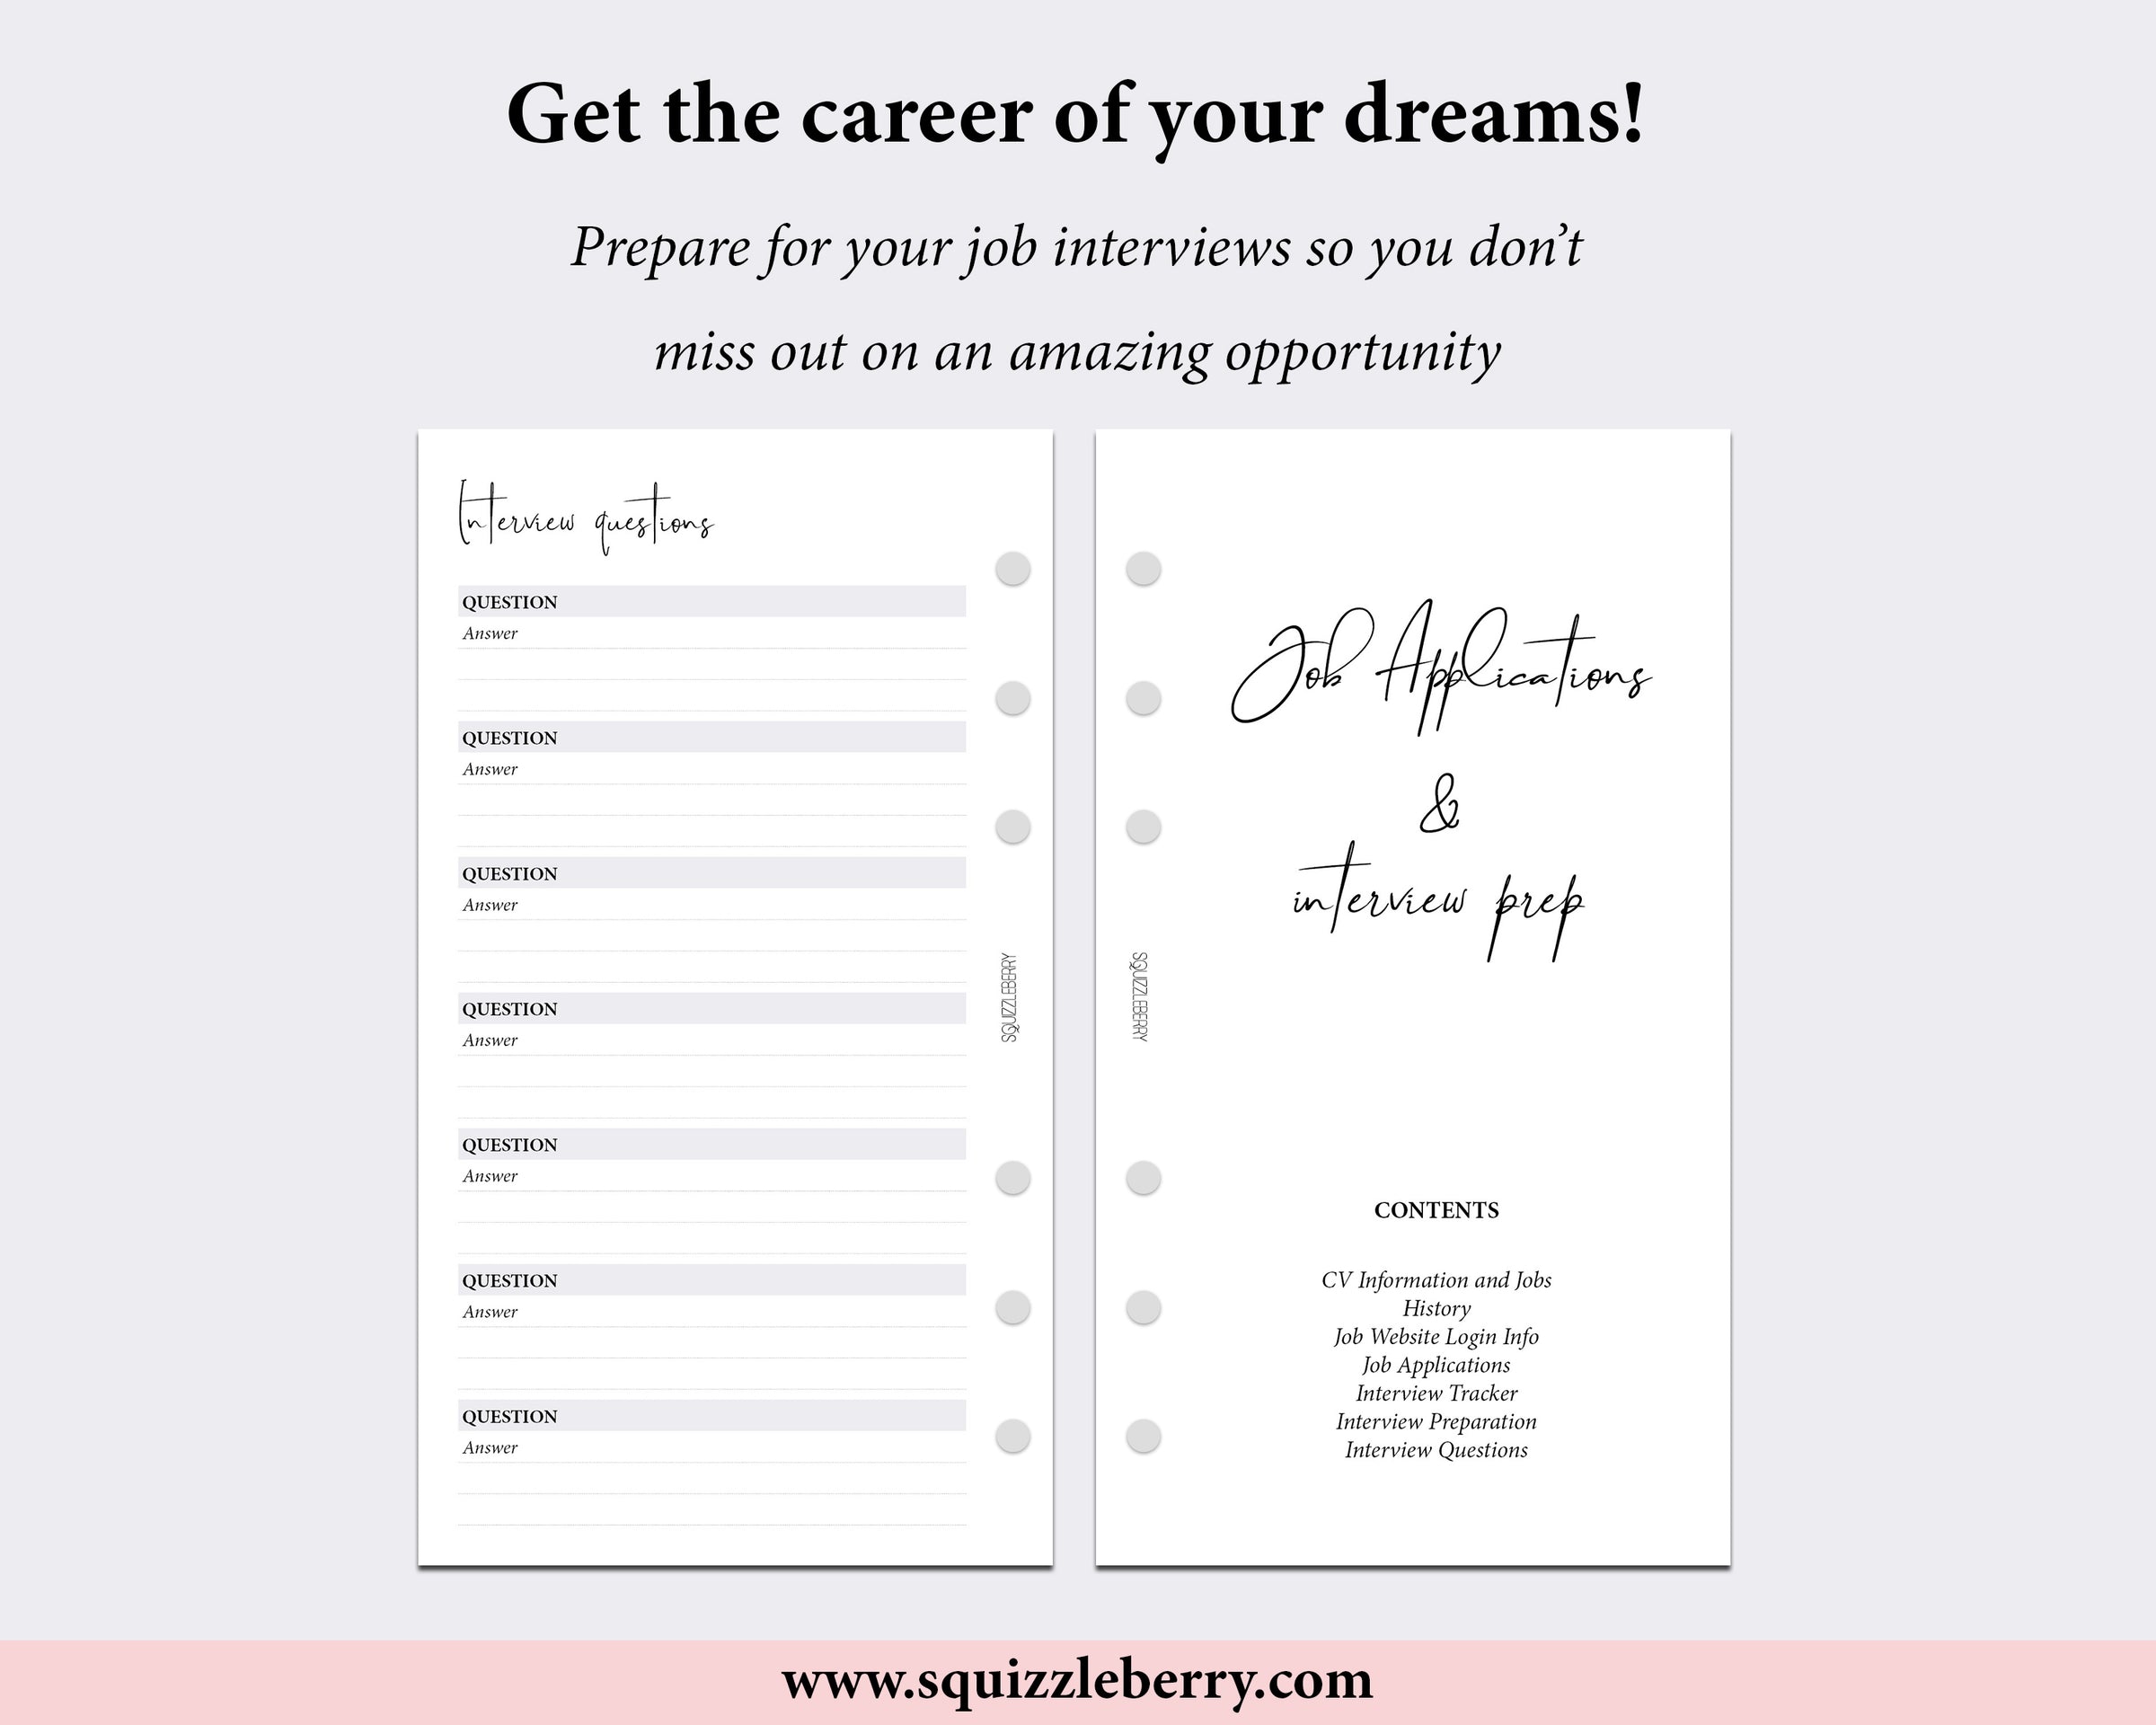 Job Search Planner Kit - Personal | SquizzleBerry